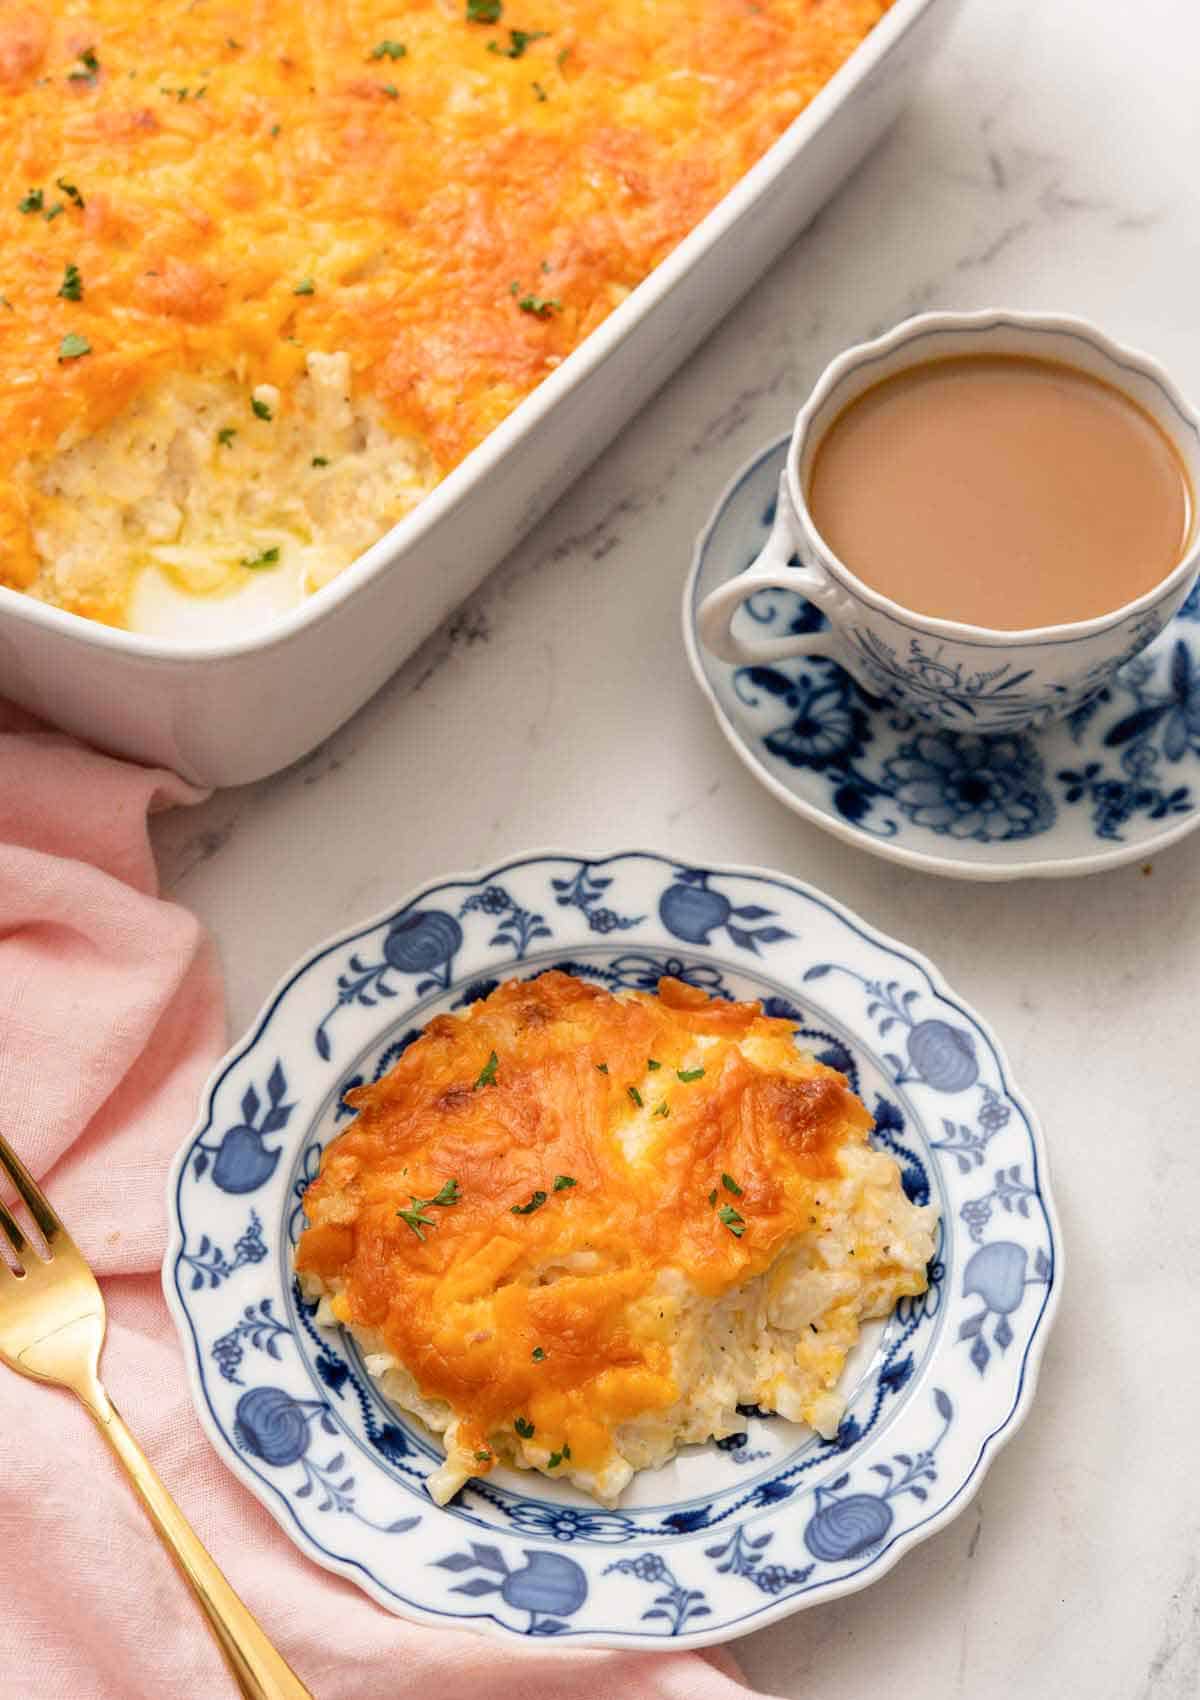 A plate with a serving of hashbrown casserole with a mug of coffee and the baking dish in the background.